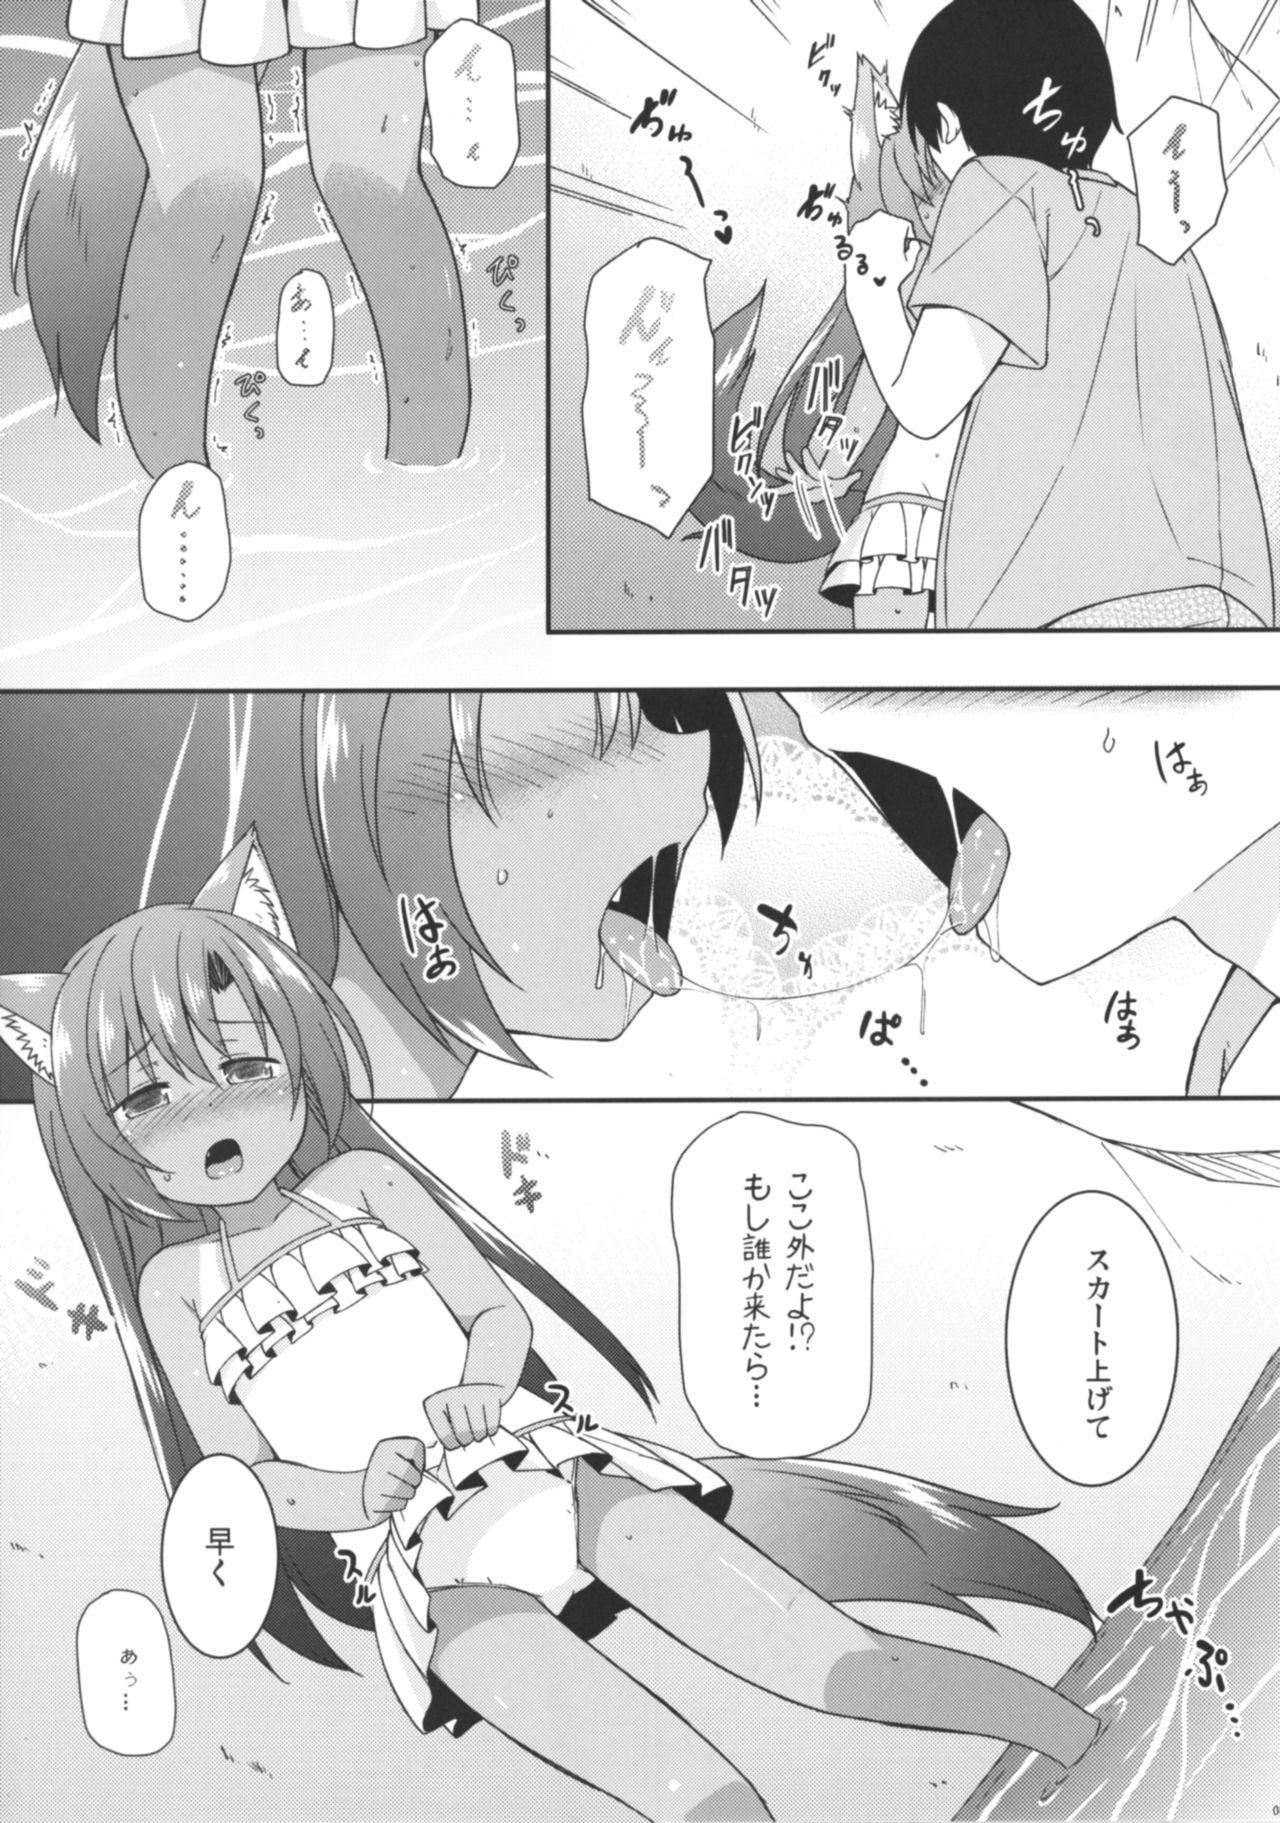 From Natsuiro Kagerou - Touhou project Pissing - Page 5